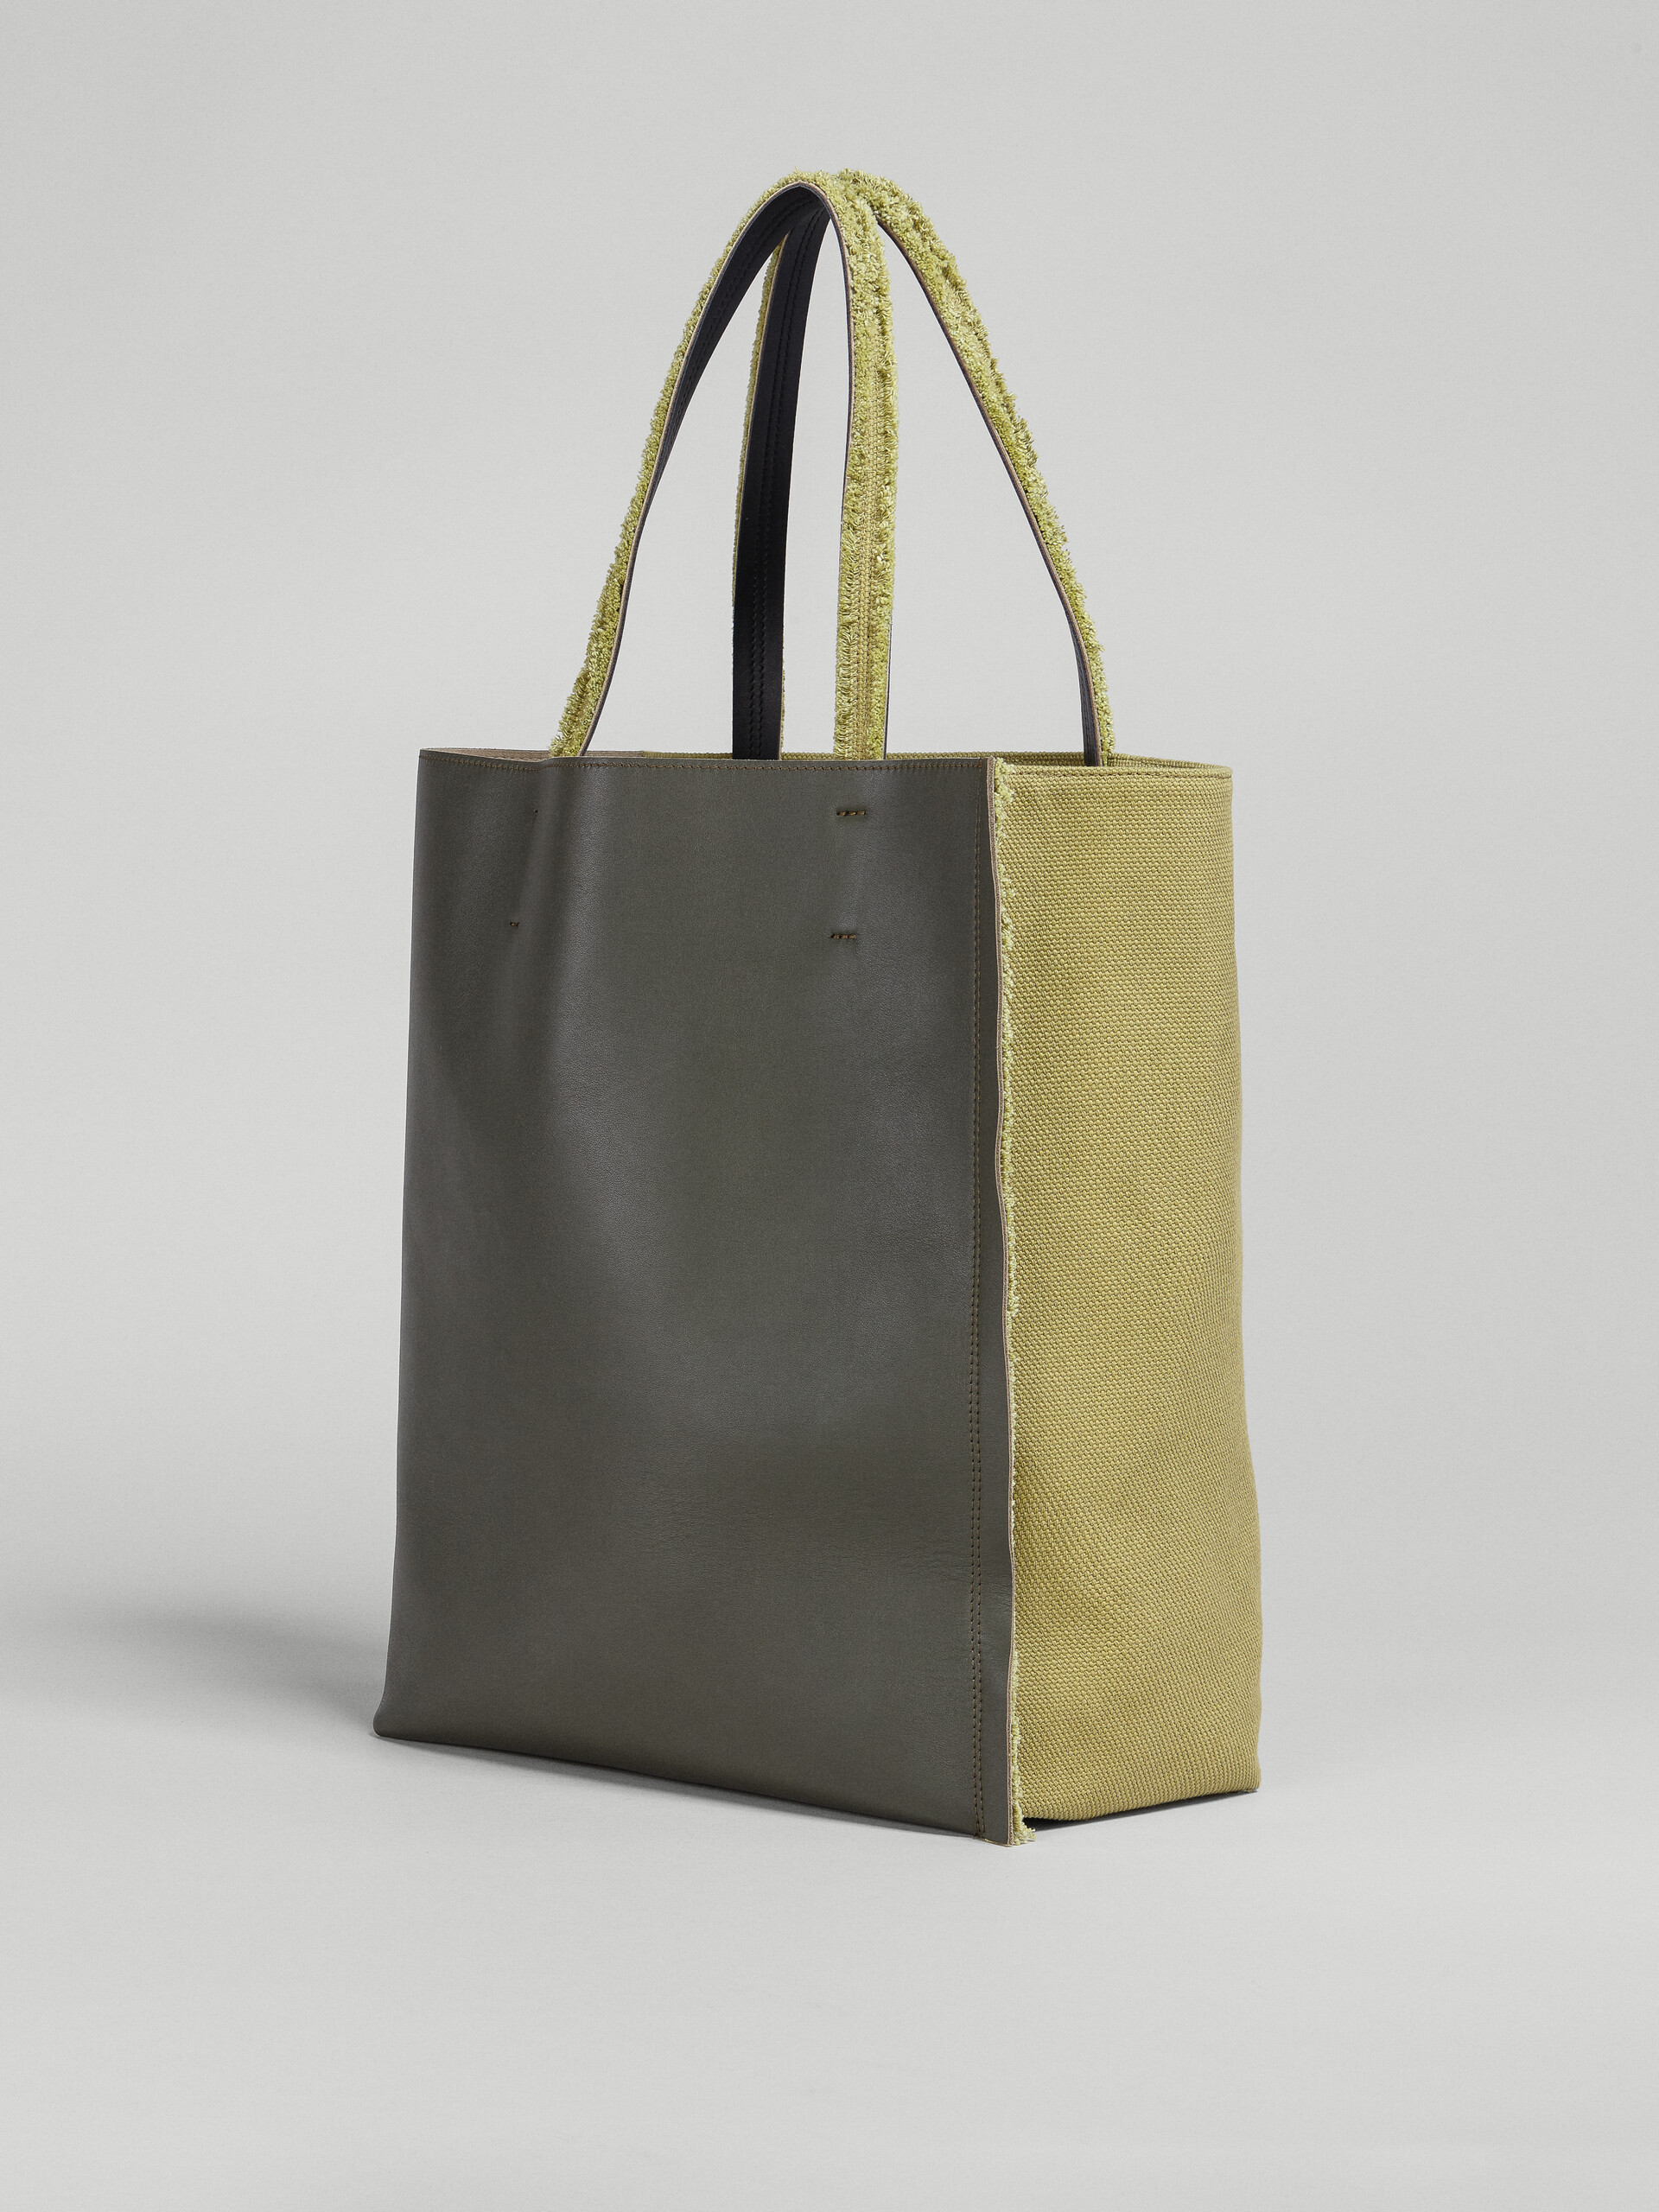 Yellow and brown leather canvas MUSEO SOFT  bag - Shopping Bags - Image 3